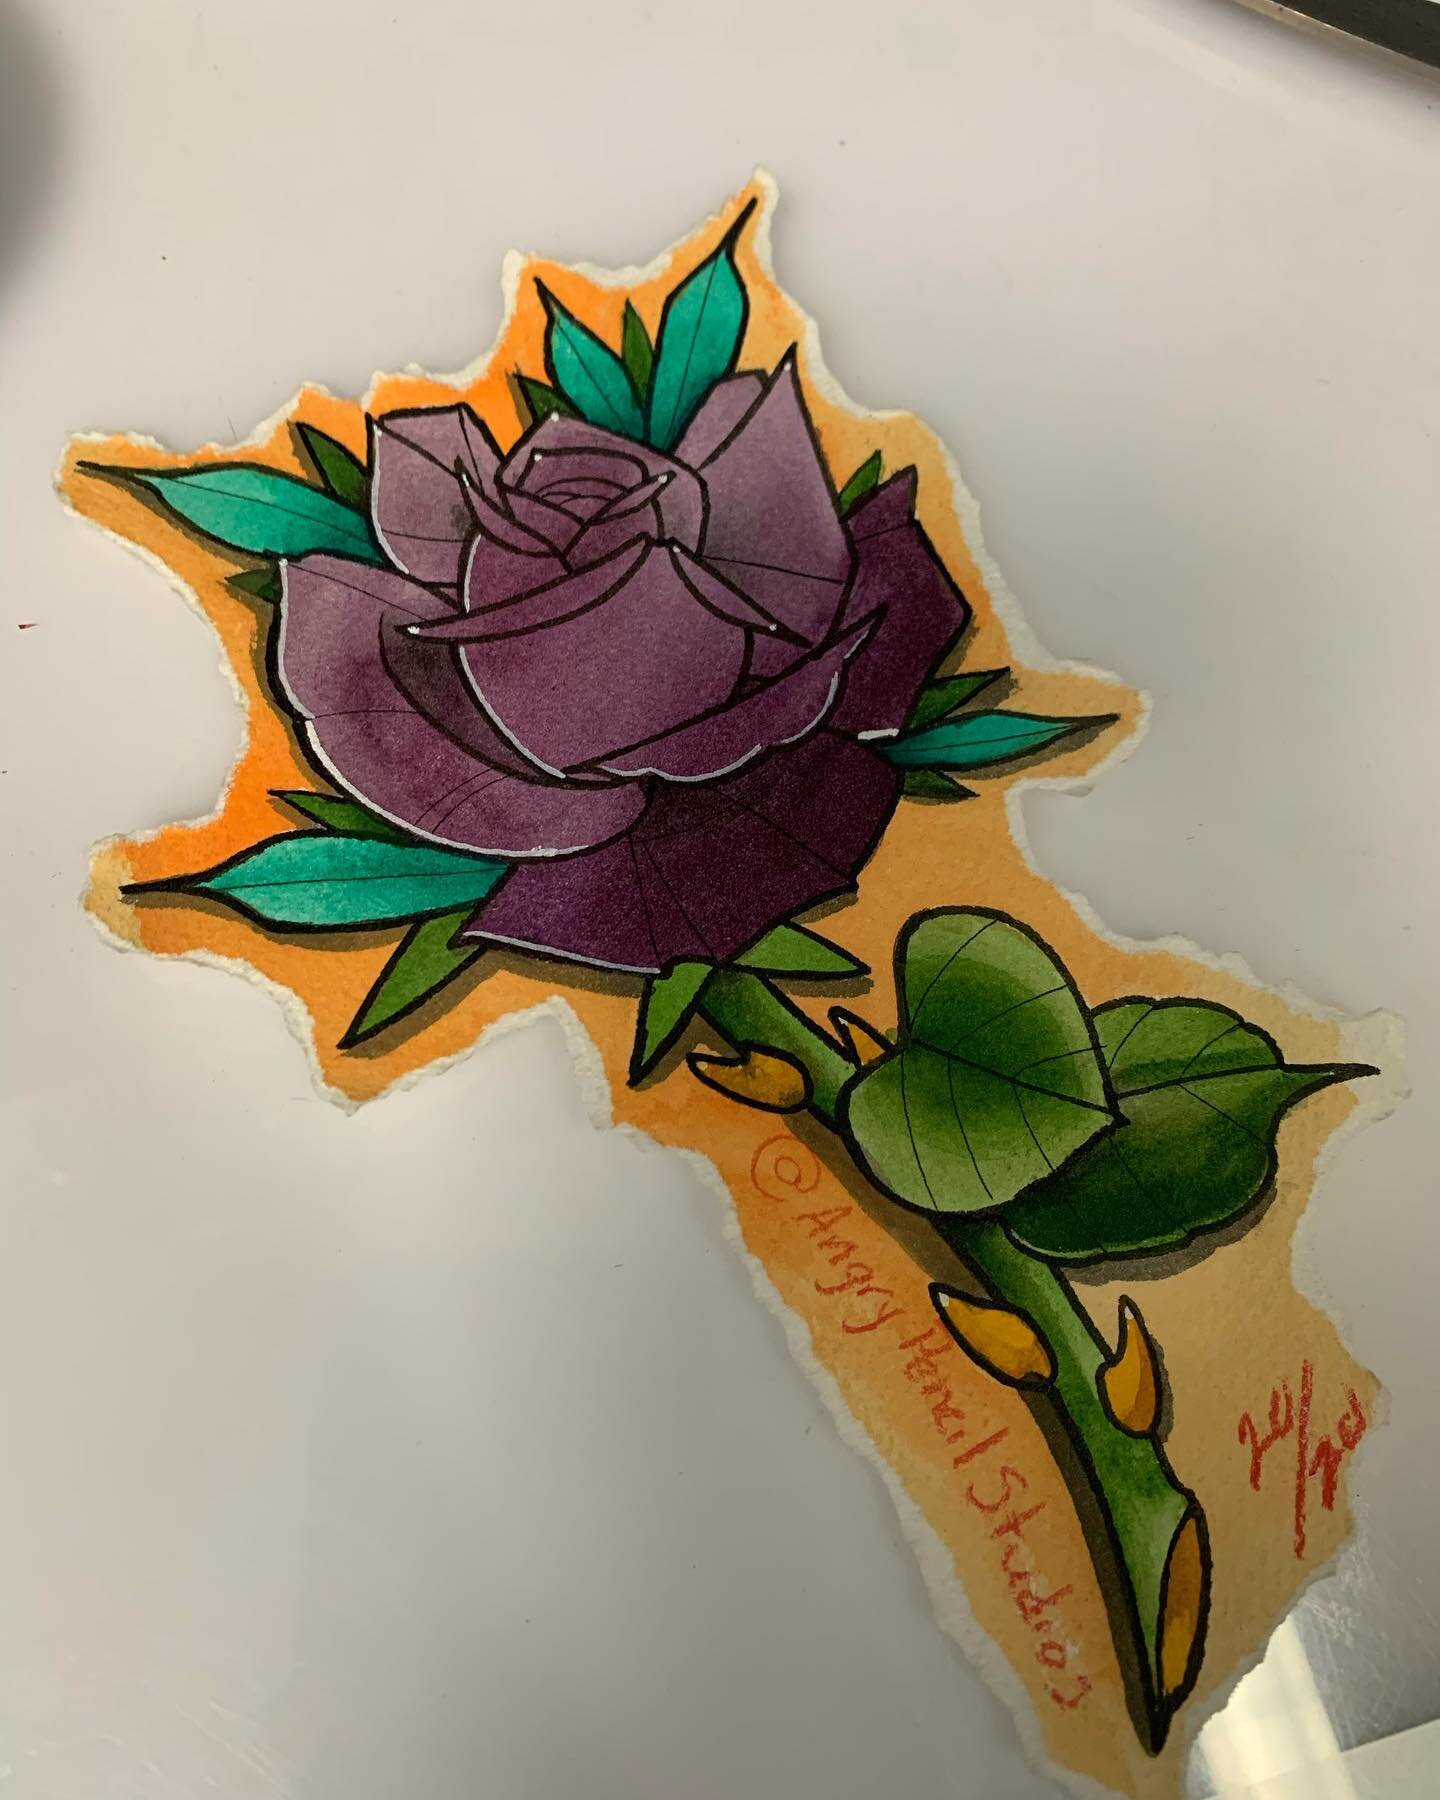 Fun little rose painting, piece is available #massachusetts #westernmasstattoo #Connecticut #connecticuttattoo #southwindsor #angrypenciltattoo #tattoo #tattoos #eternalink #hivecaps #saniderm #helios #dragonsbloodbutter #MAtattoo #CTtattoo #CTtattoo